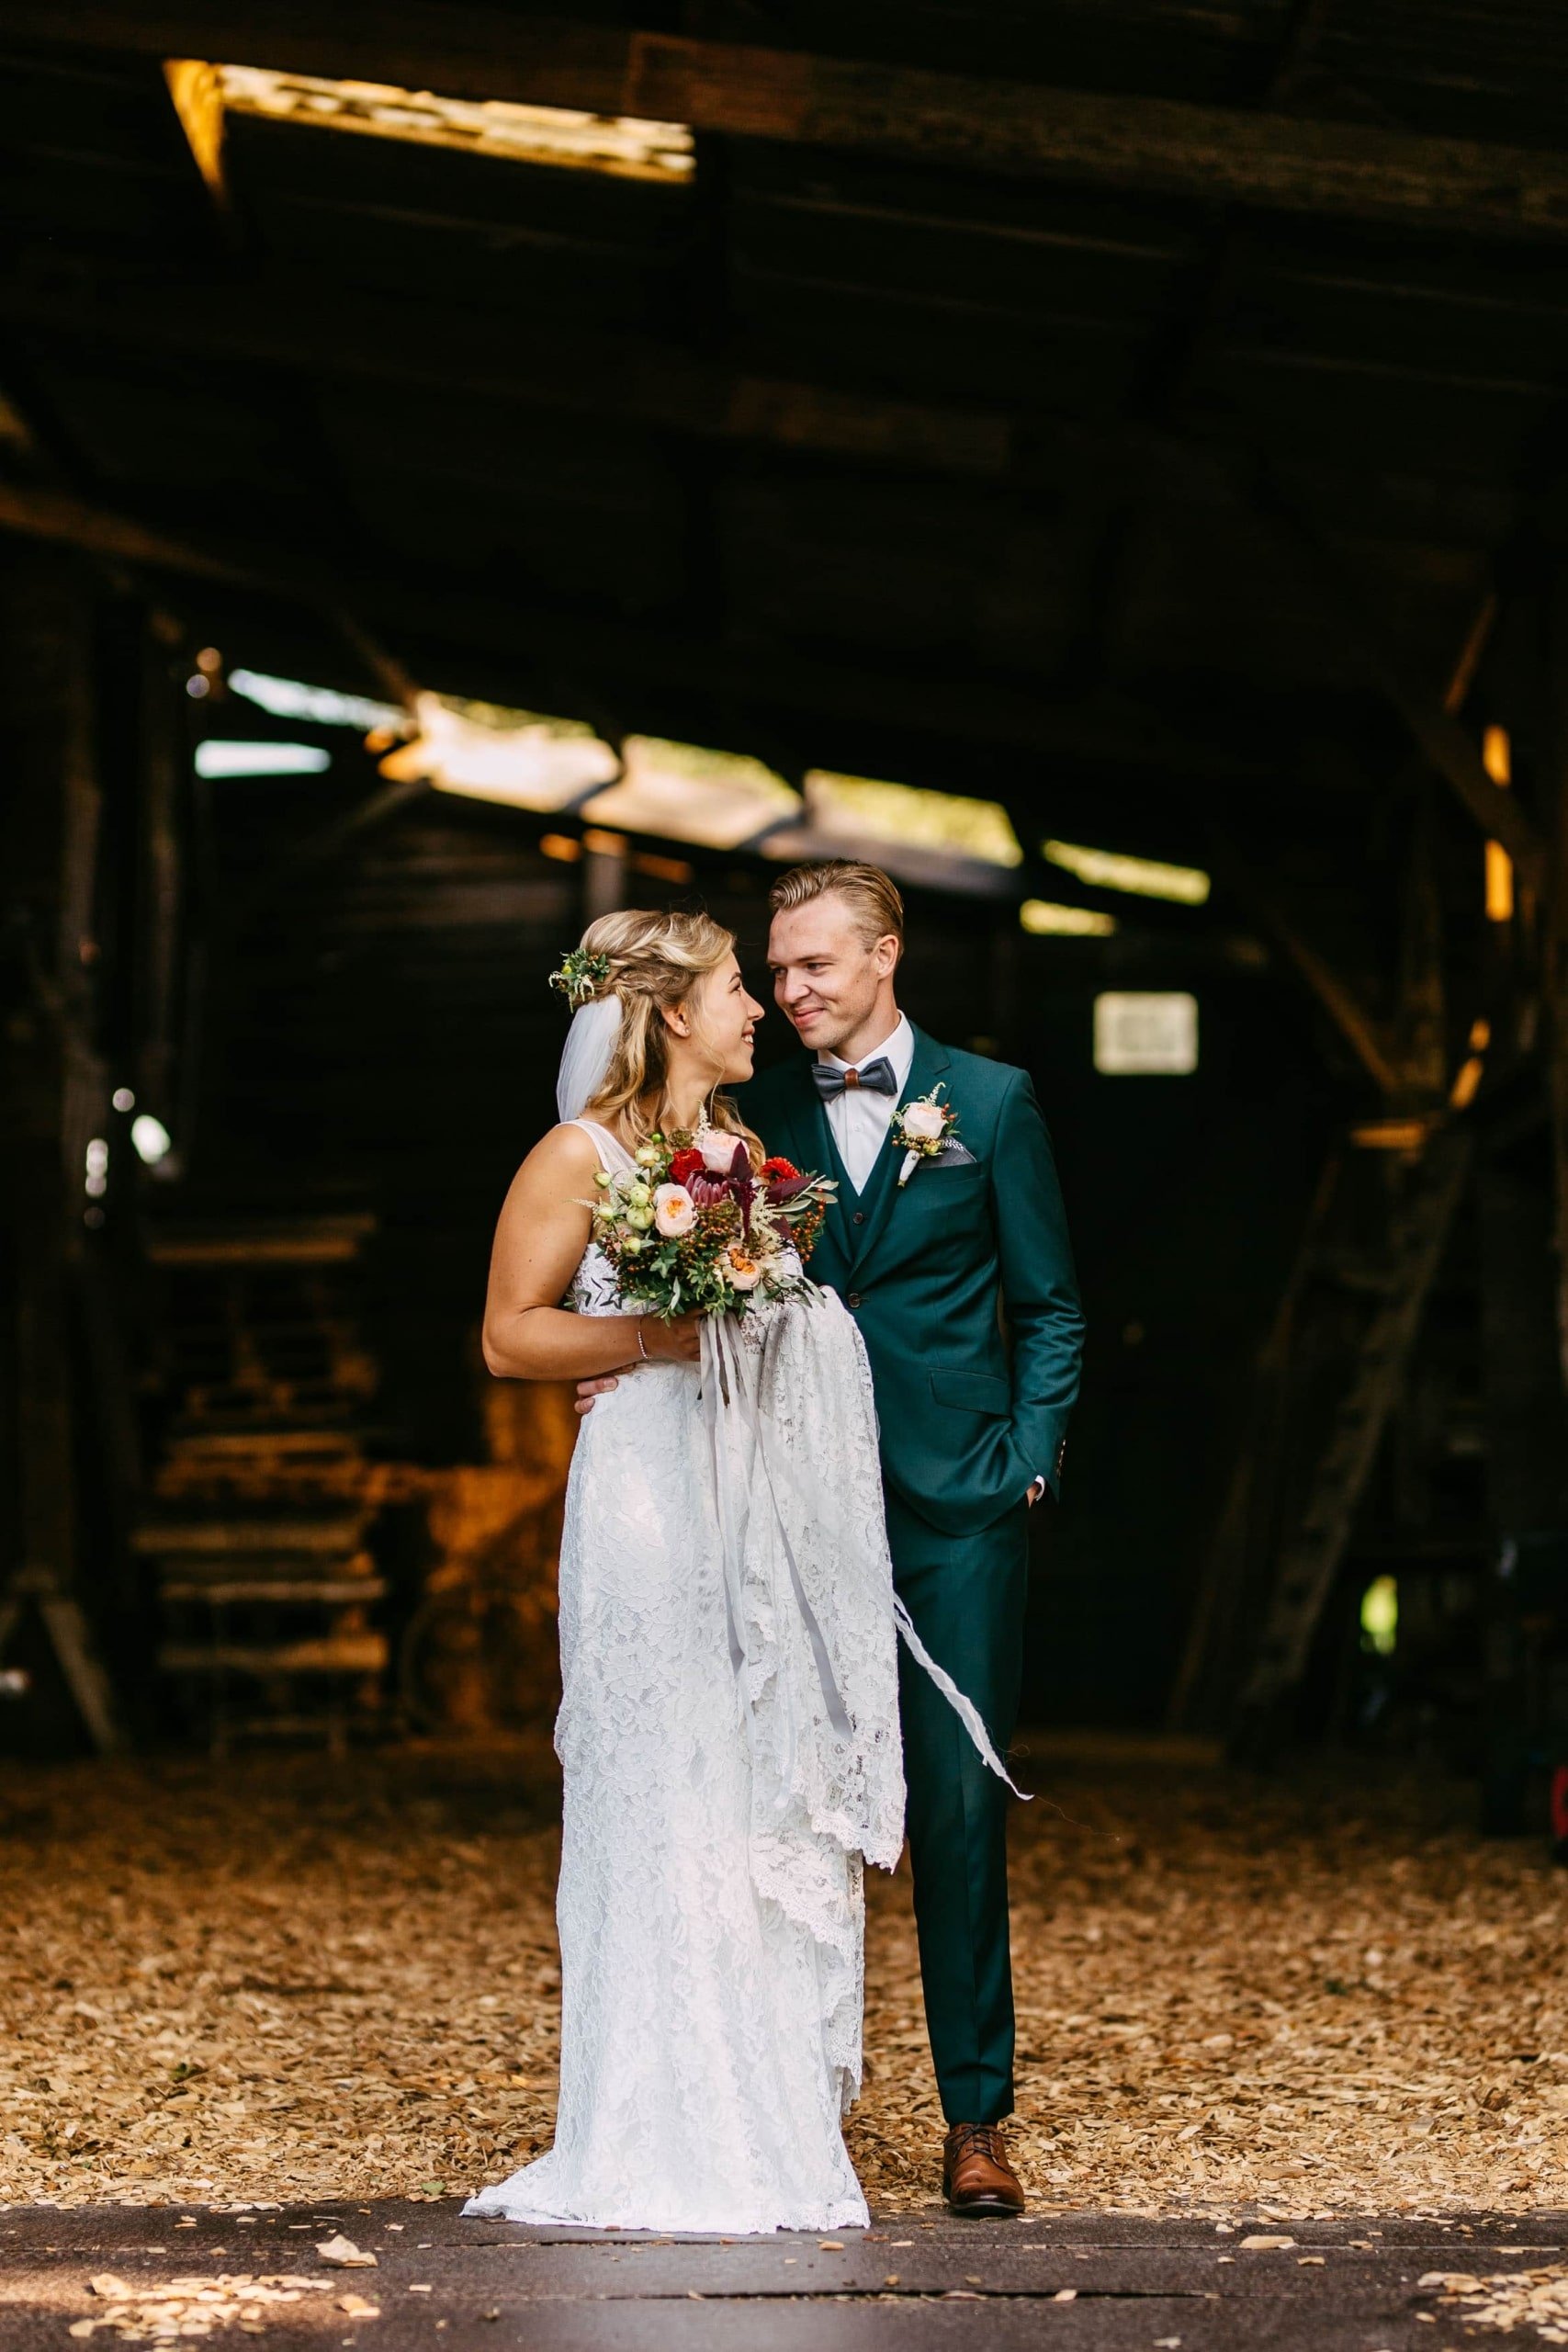 A bride and groom stand in a barn.